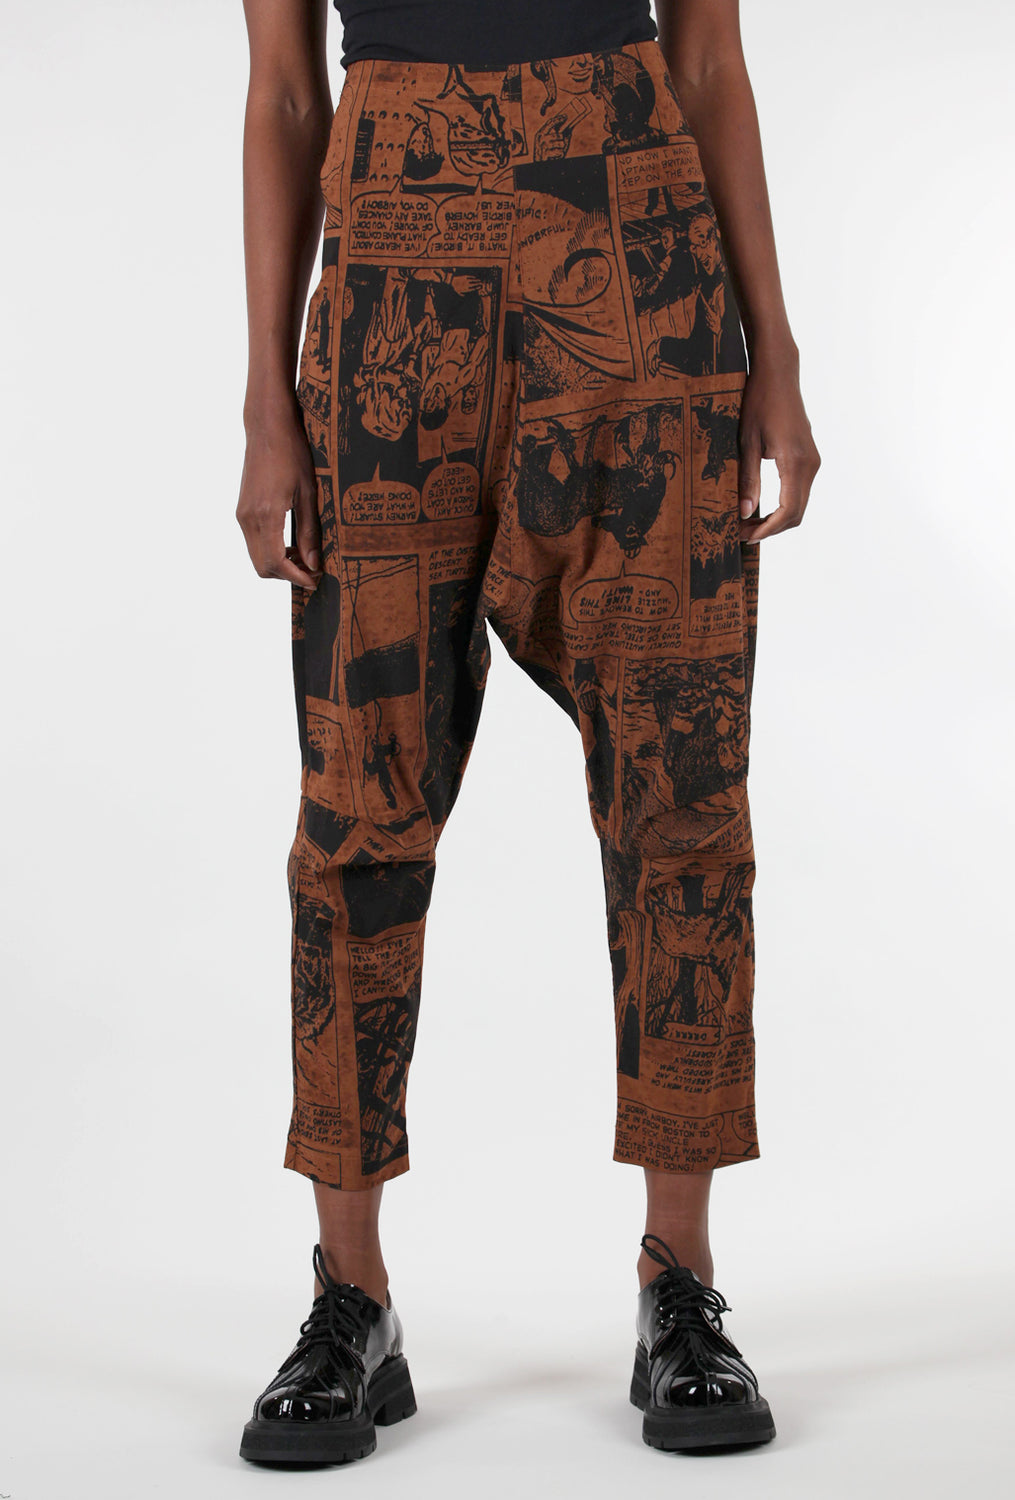 Rundholz Sig Stretch Slouch-Rise Trouser, Brick Comic 